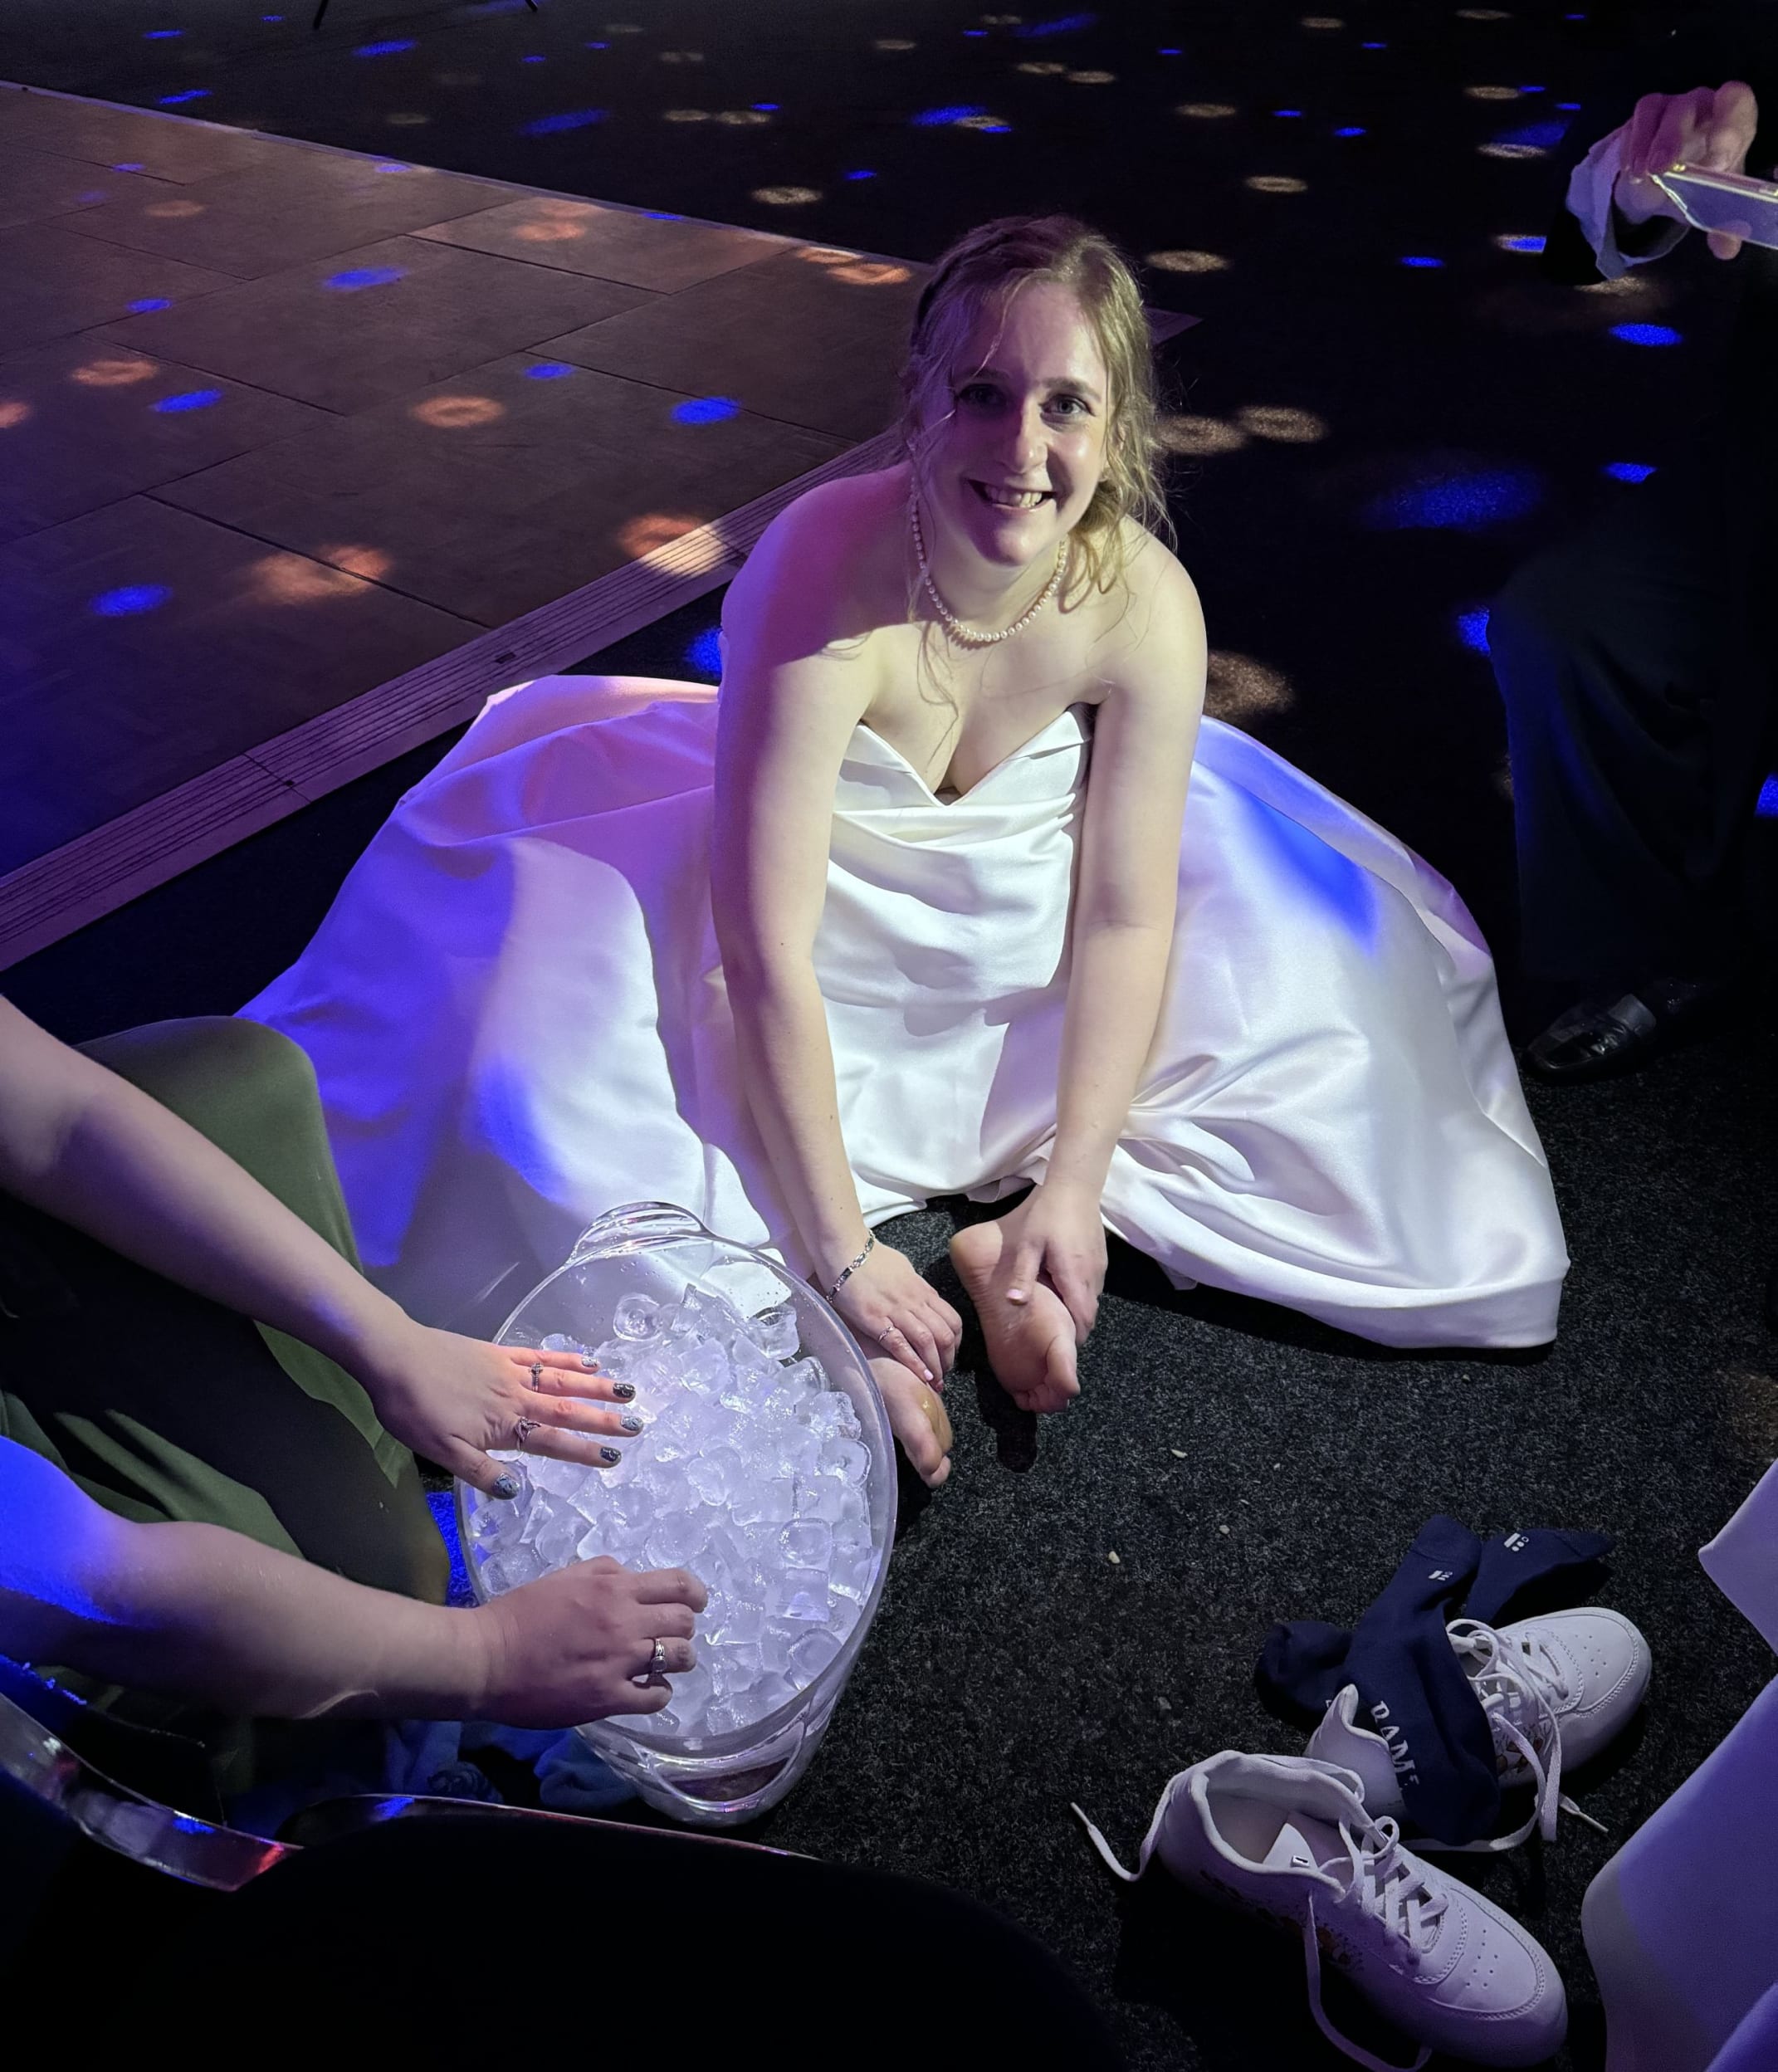 Heather sitting on the floor in her wedding dress with an ice bucket for her feet